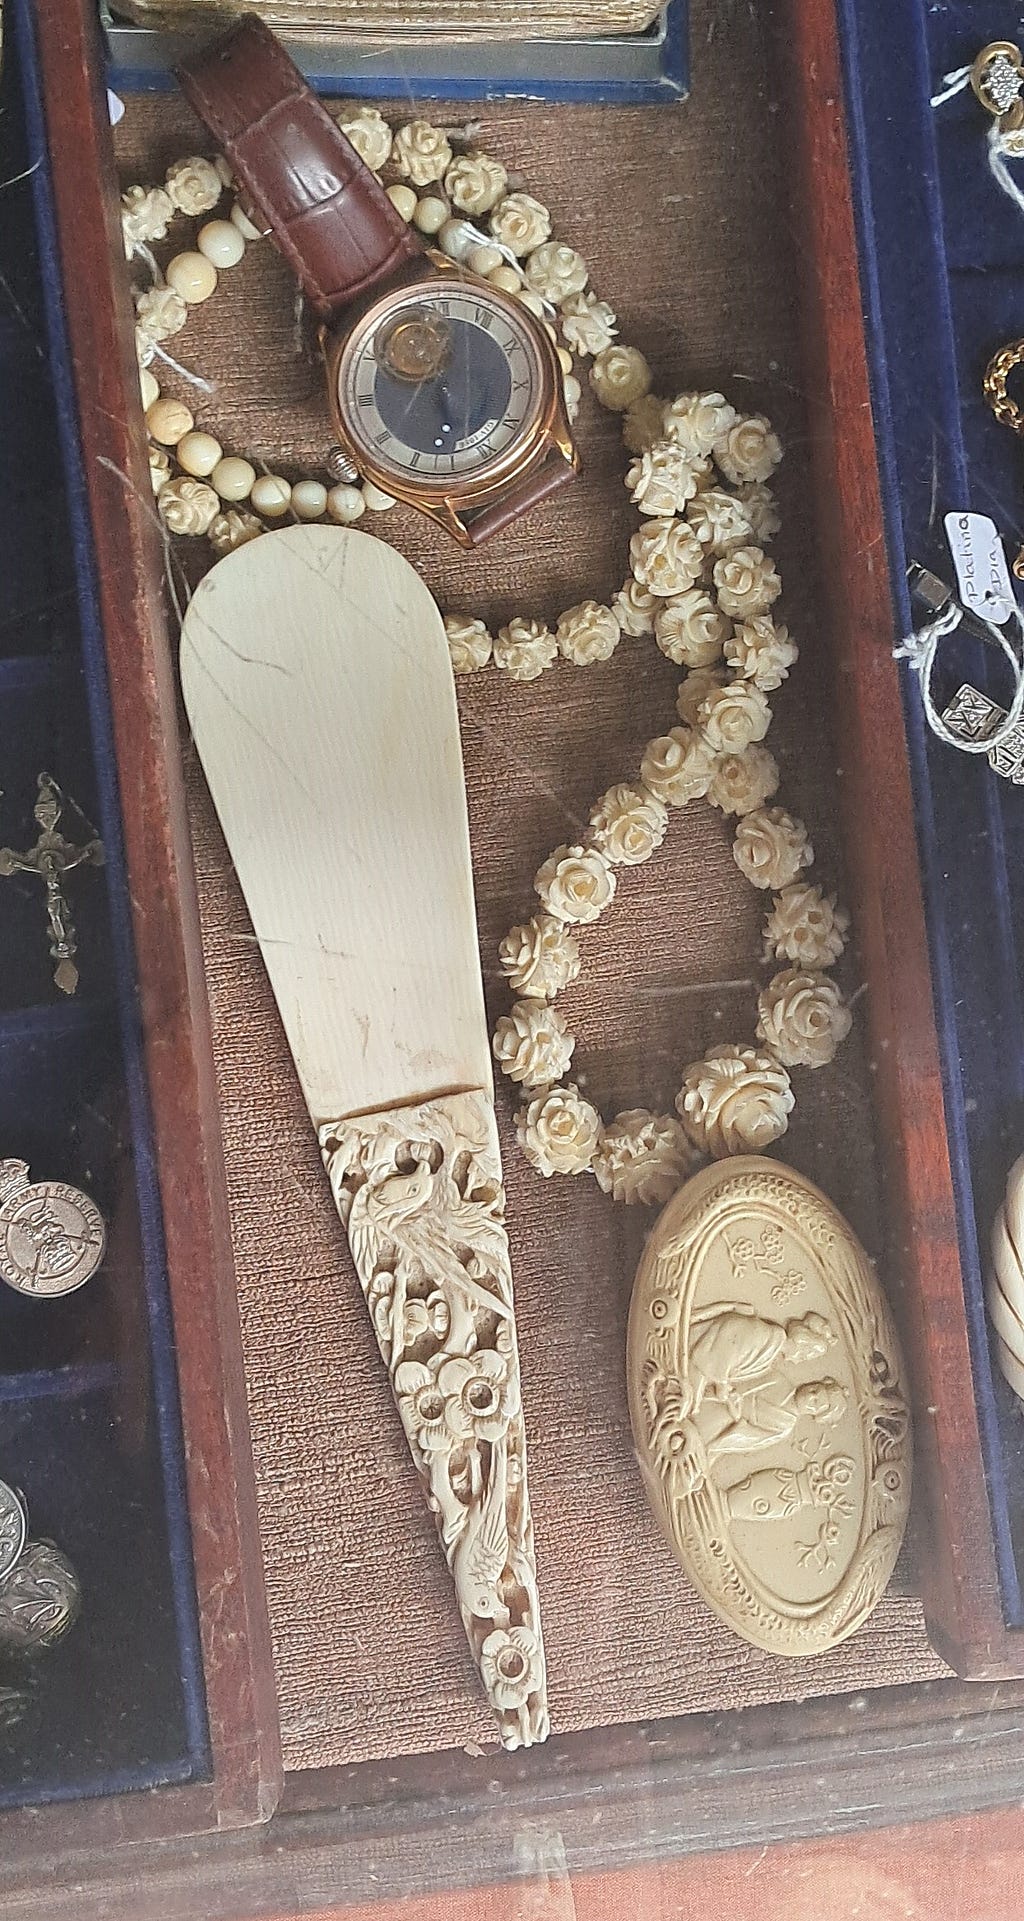 Ivory product at market in Benidorm, Alicante, Spain